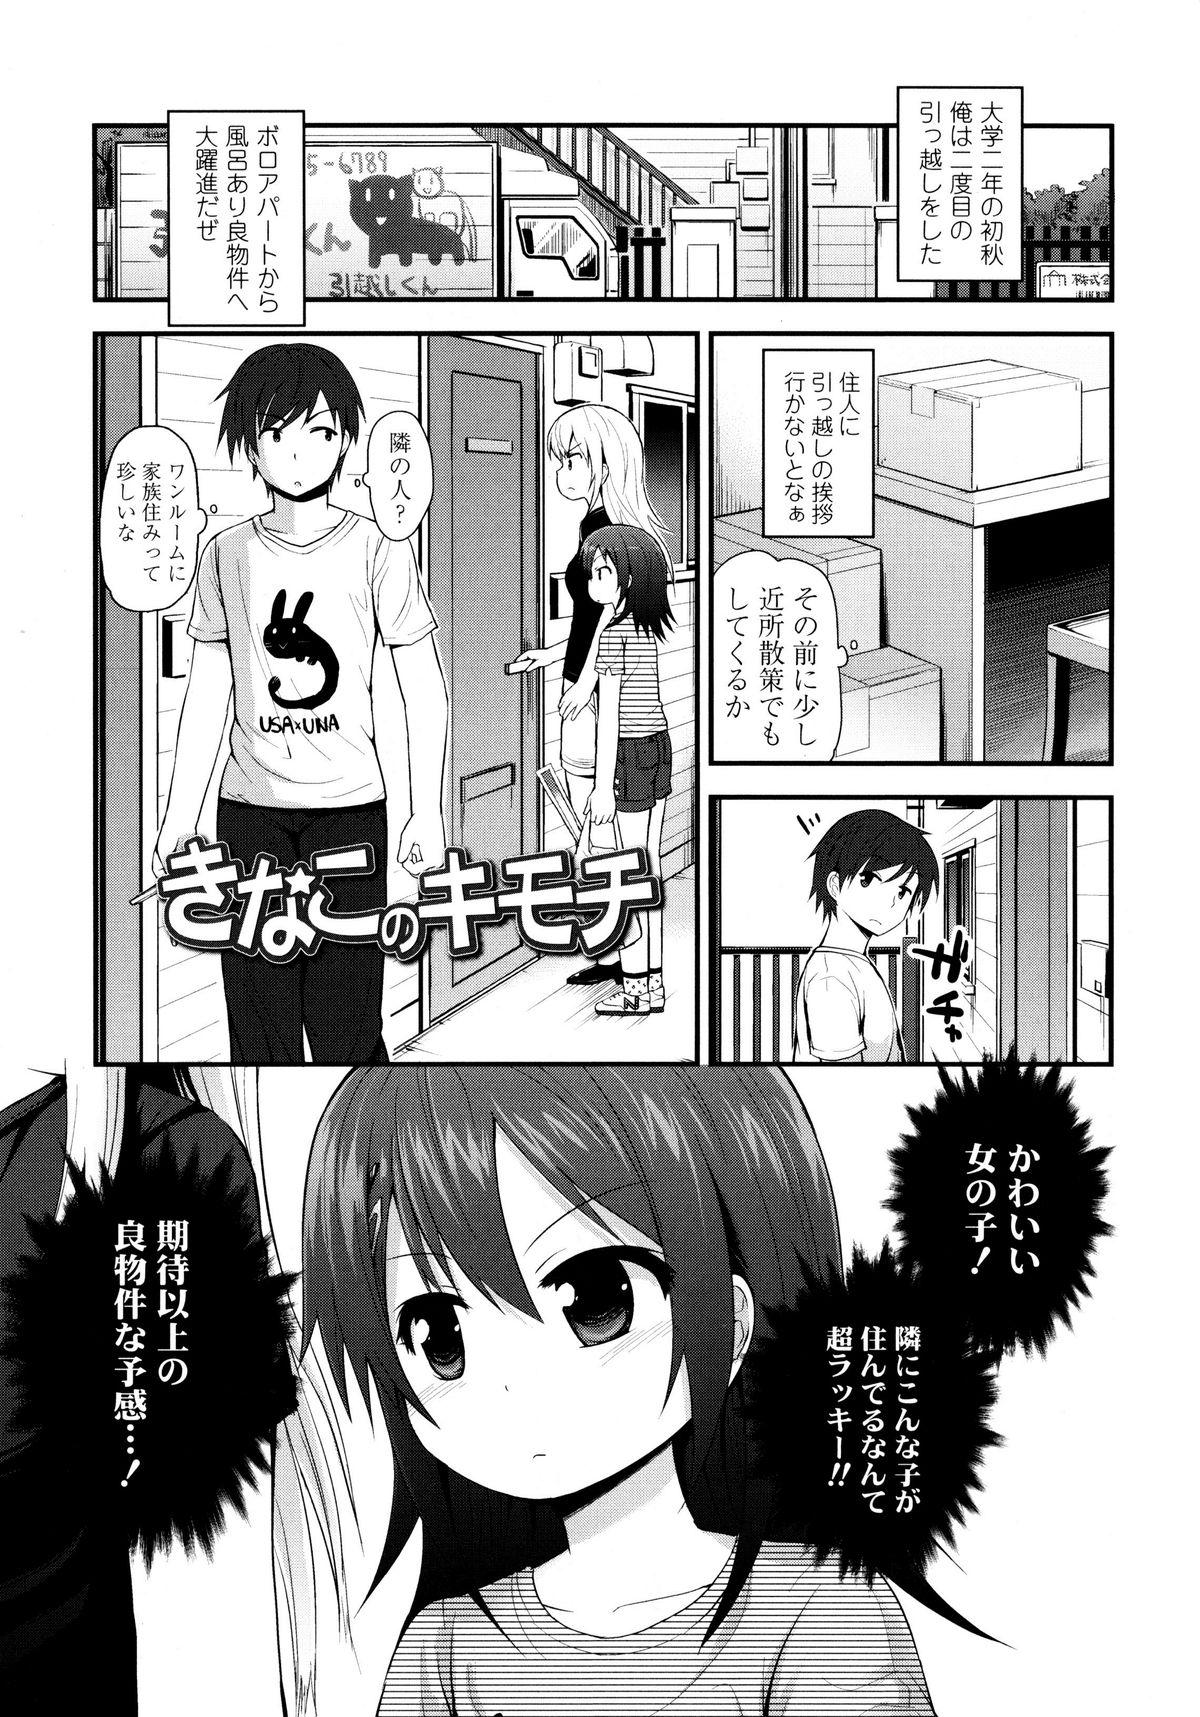 Oral Sex Lolicon☆Justice 18 Year Old Porn - Page 6